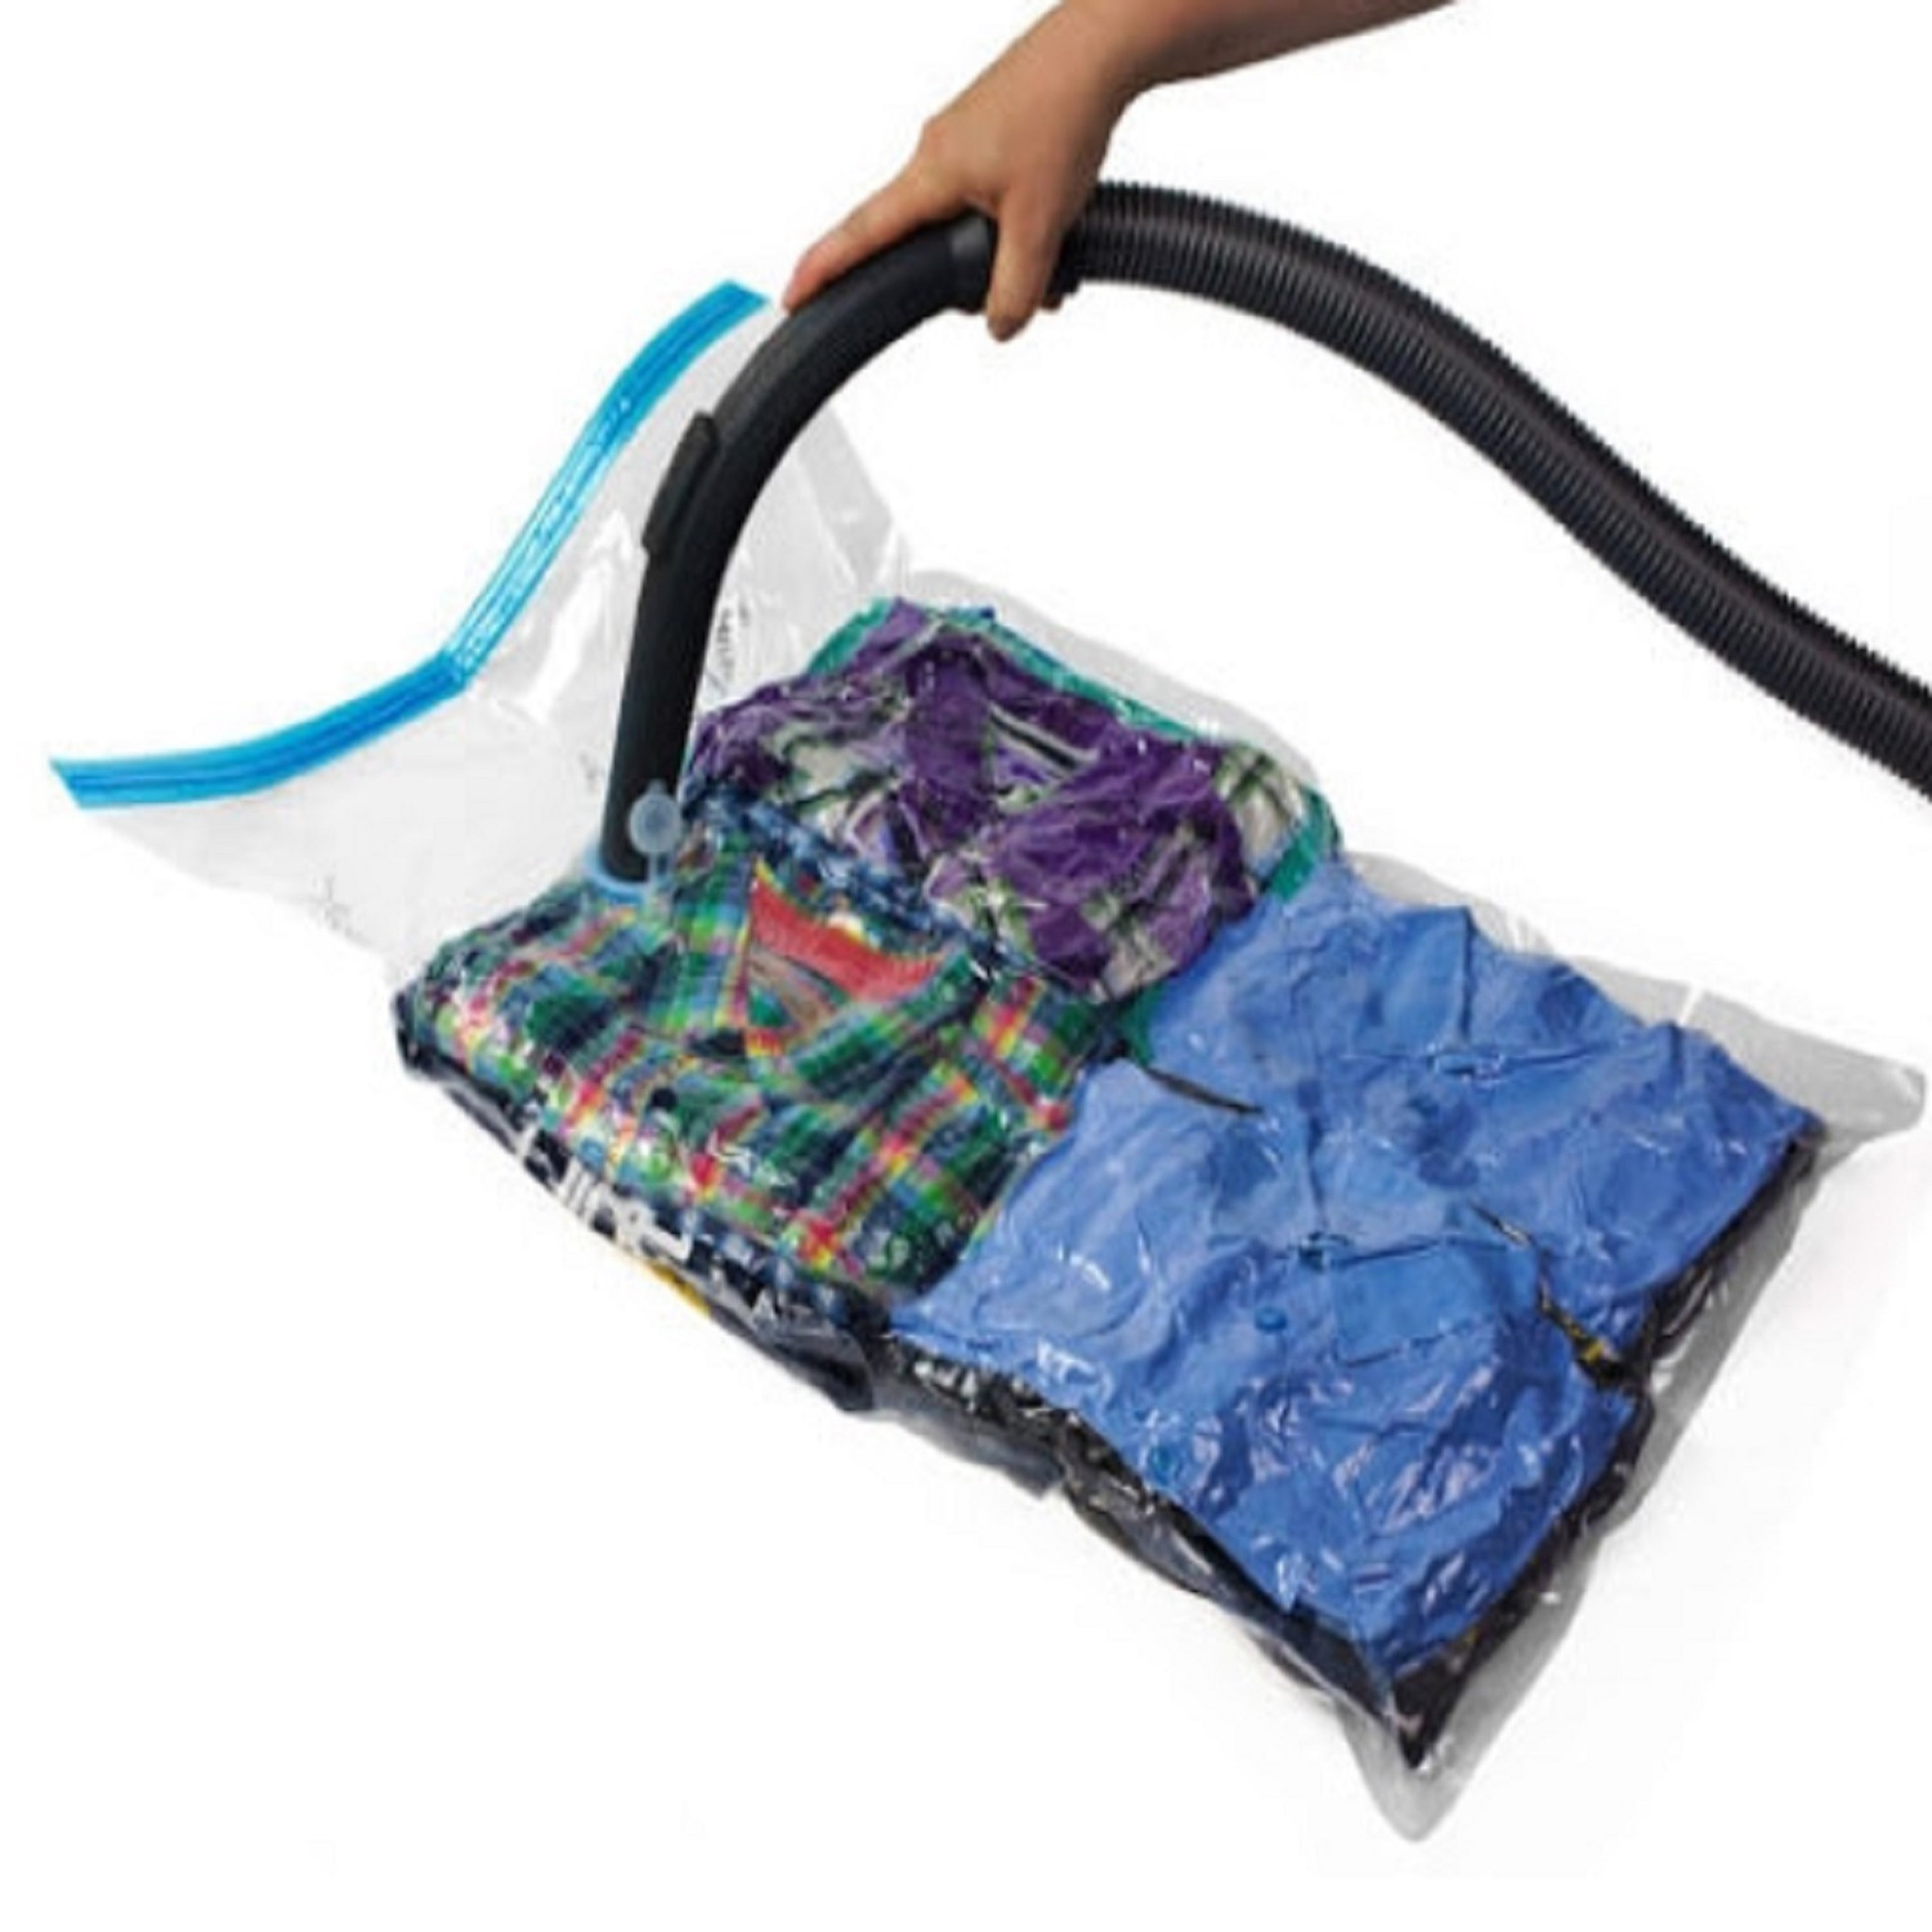 space saver vacuum bags for travel